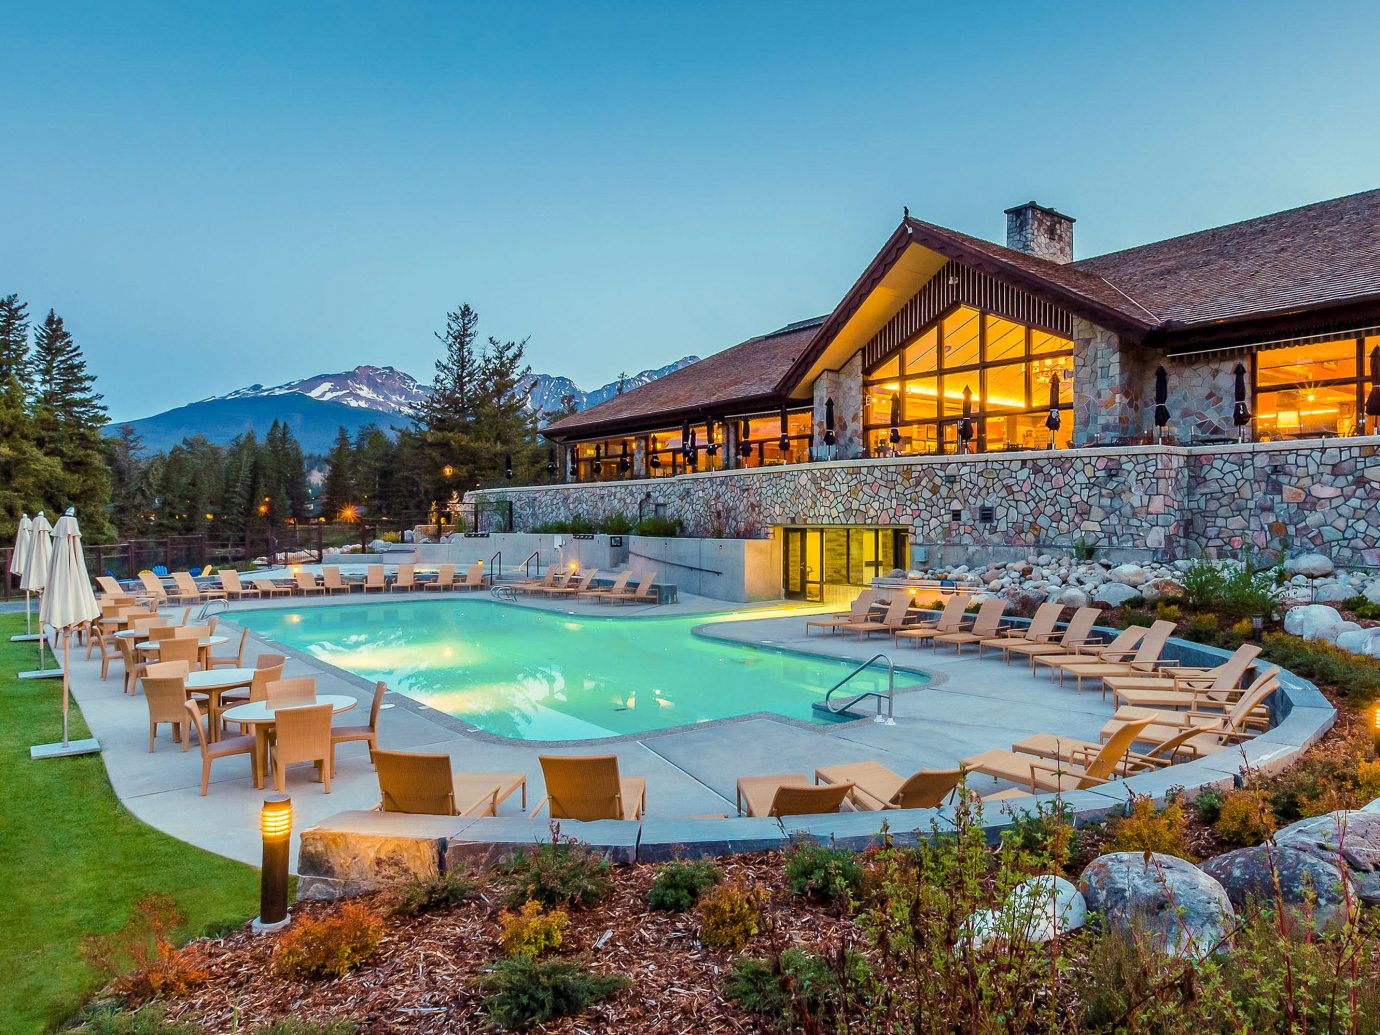 Alberta Boutique Hotels Canada Hotels Road Trips swimming pool property Resort leisure estate resort town water real estate home reflection Villa house sky landscape cottage vacation amenity